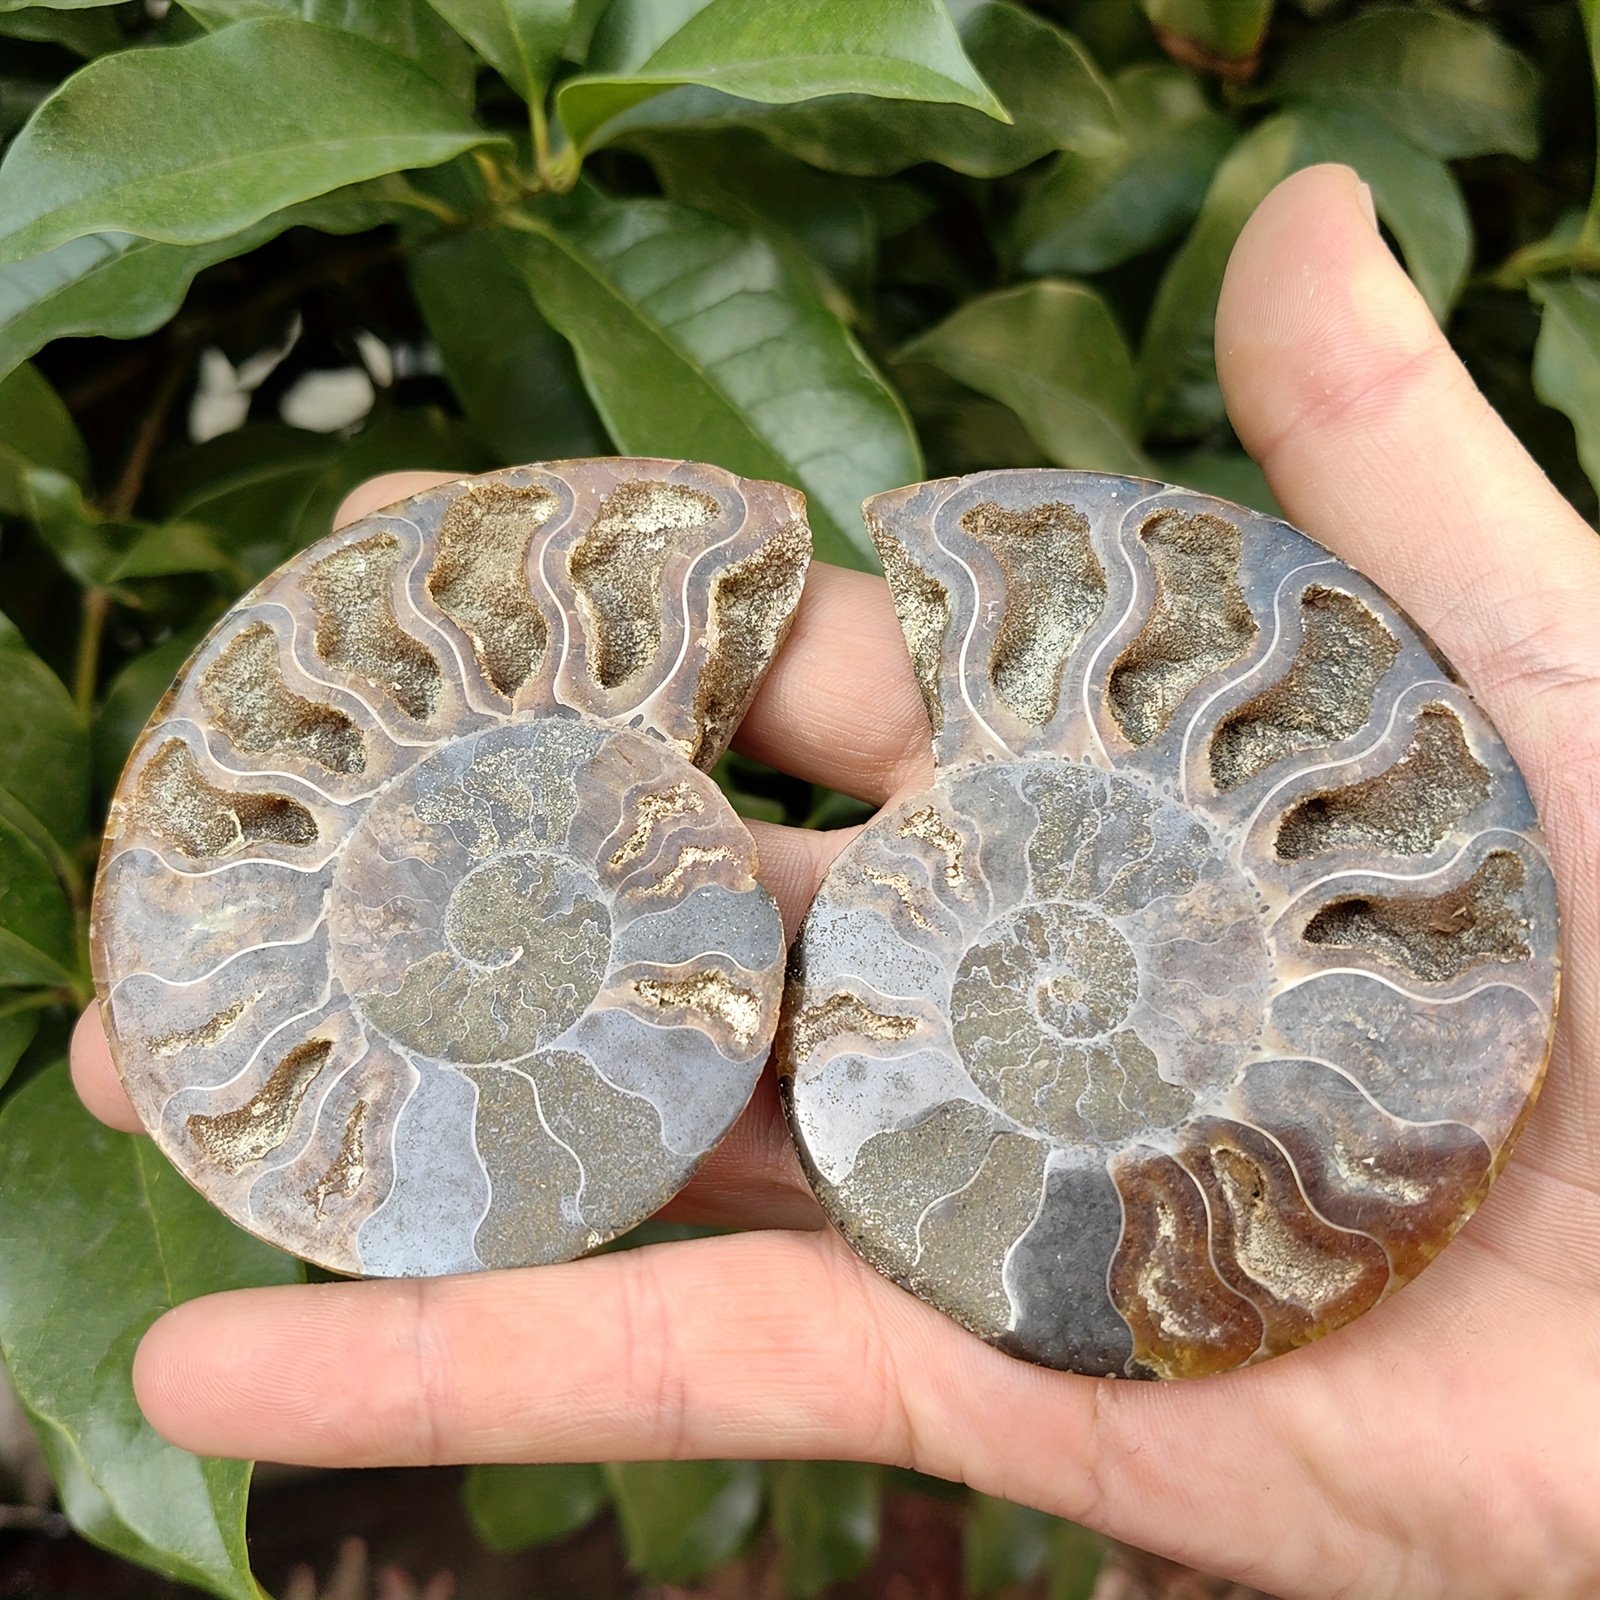 natural conch paleontological fossils rough stone geology